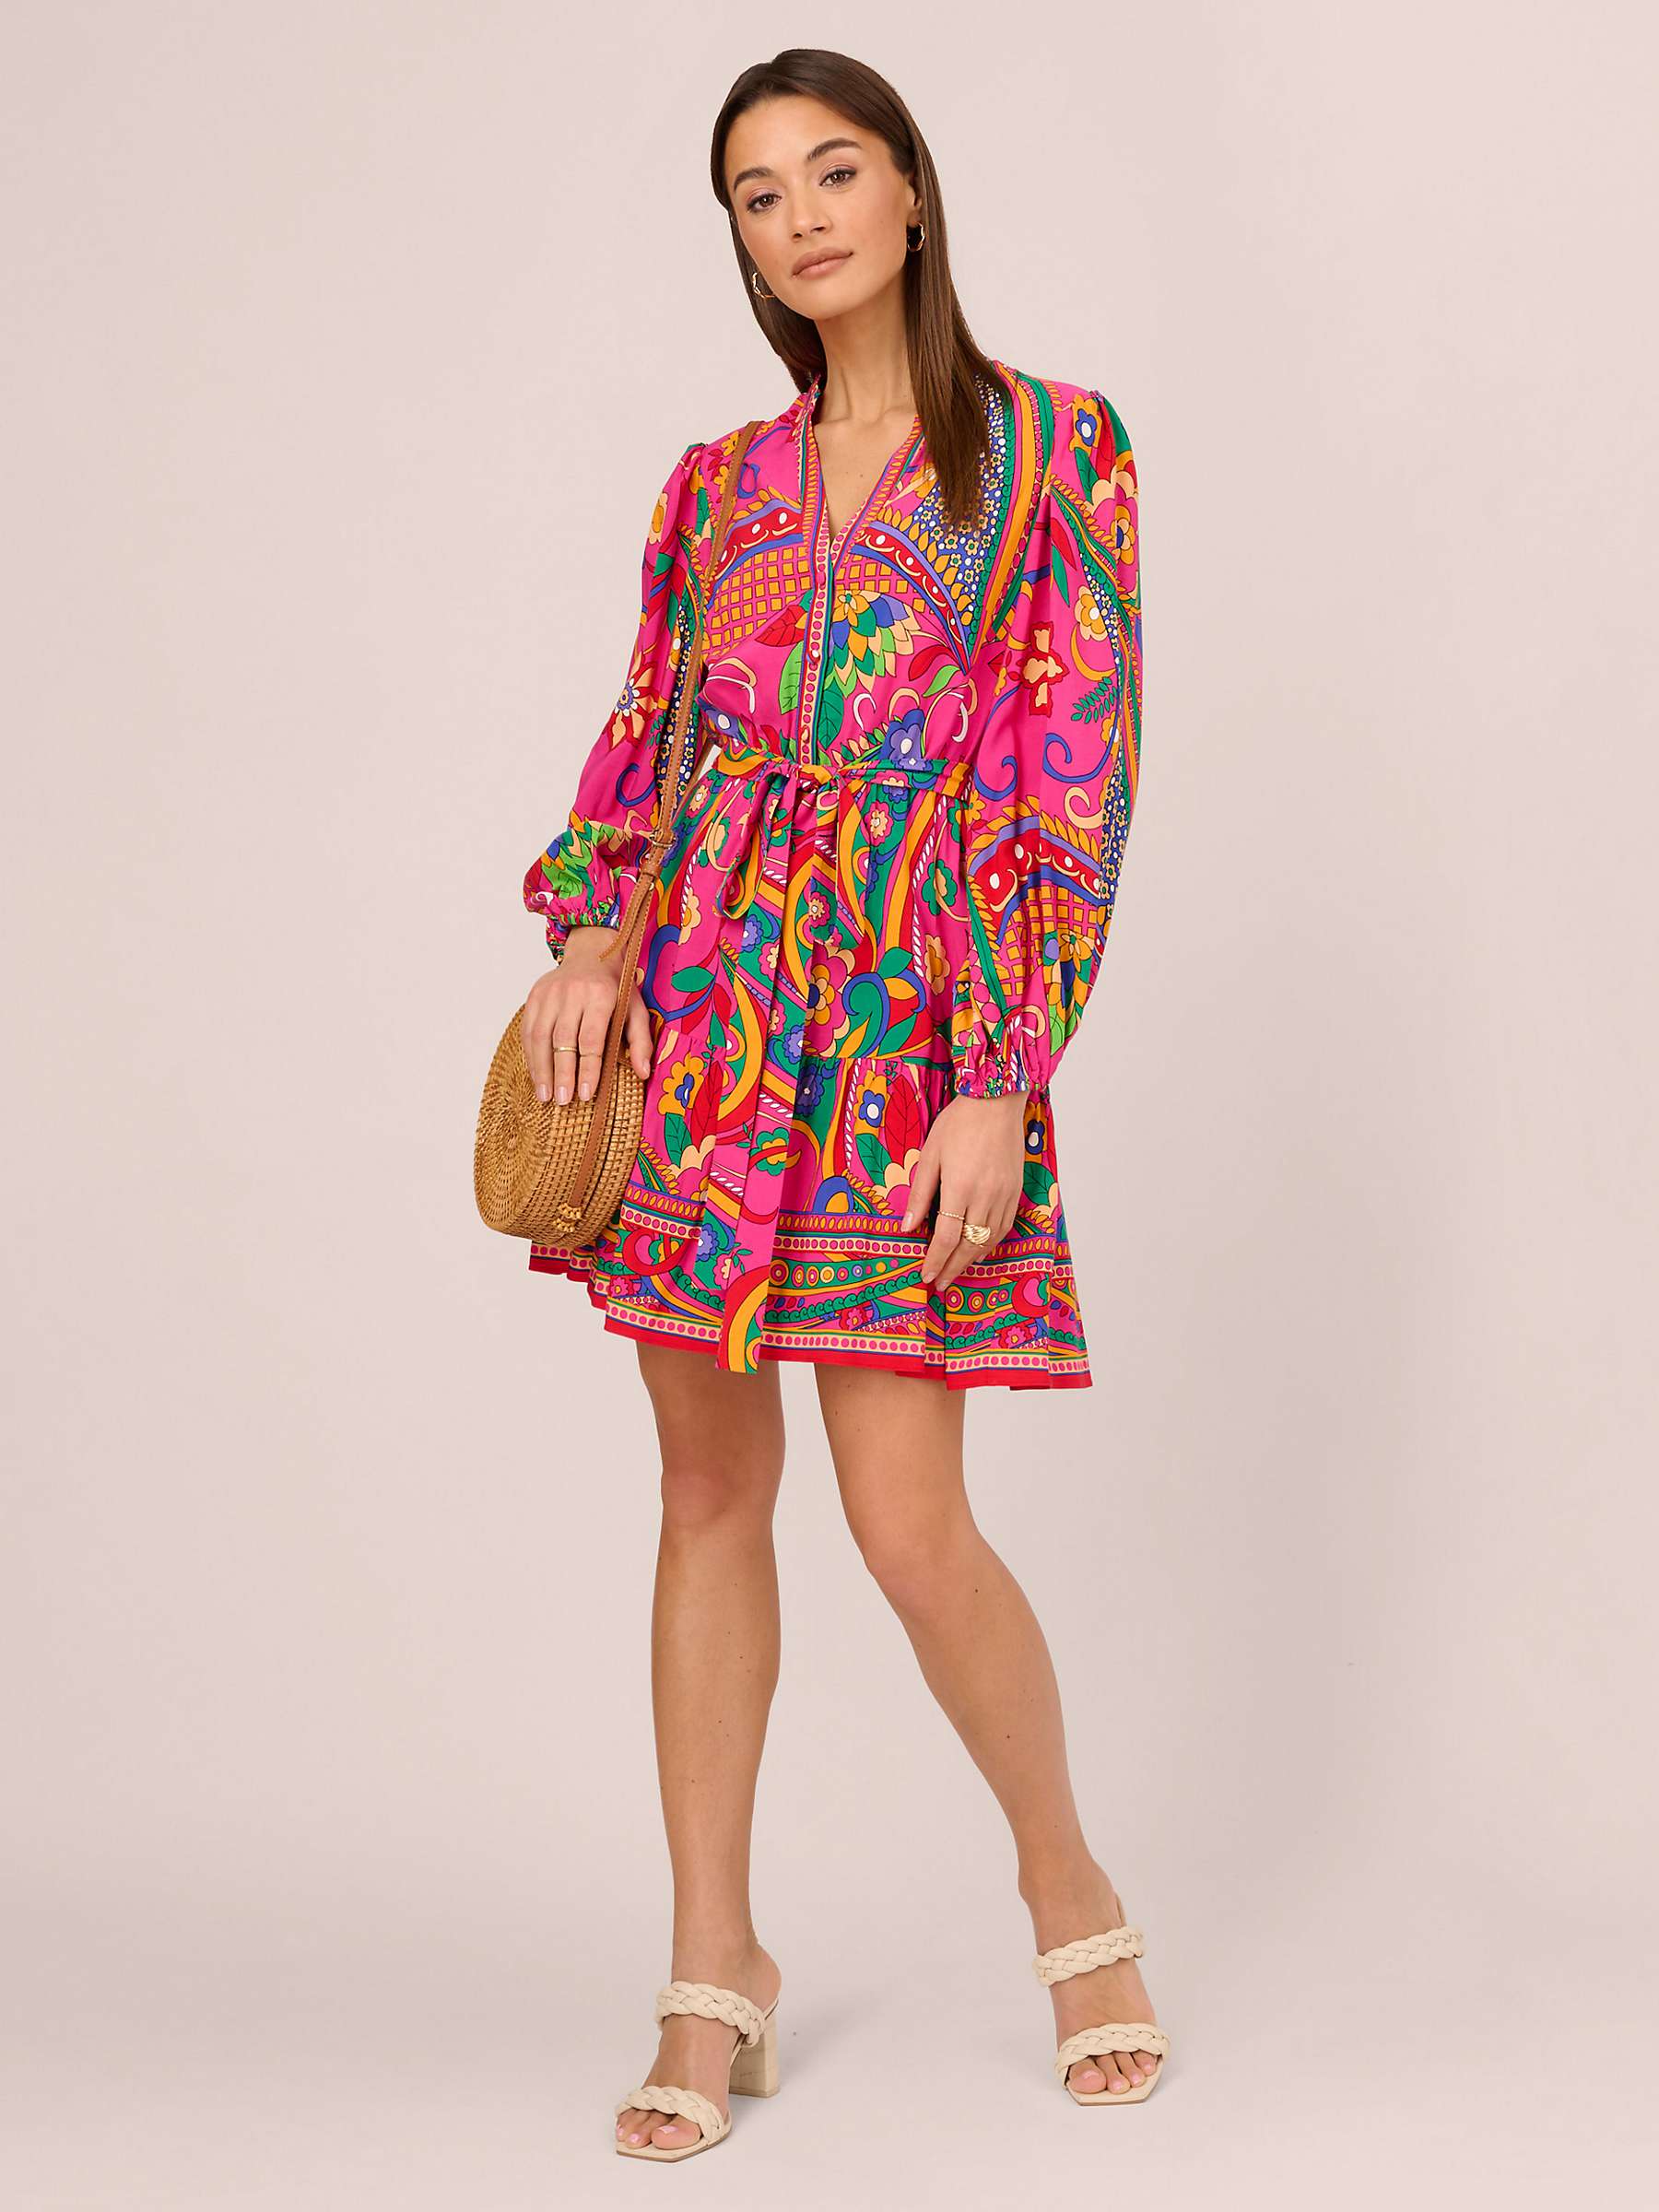 Buy Adrianna by Adrianna Papell Retro Abstract Print Mini Dress, Pink/Multi Online at johnlewis.com